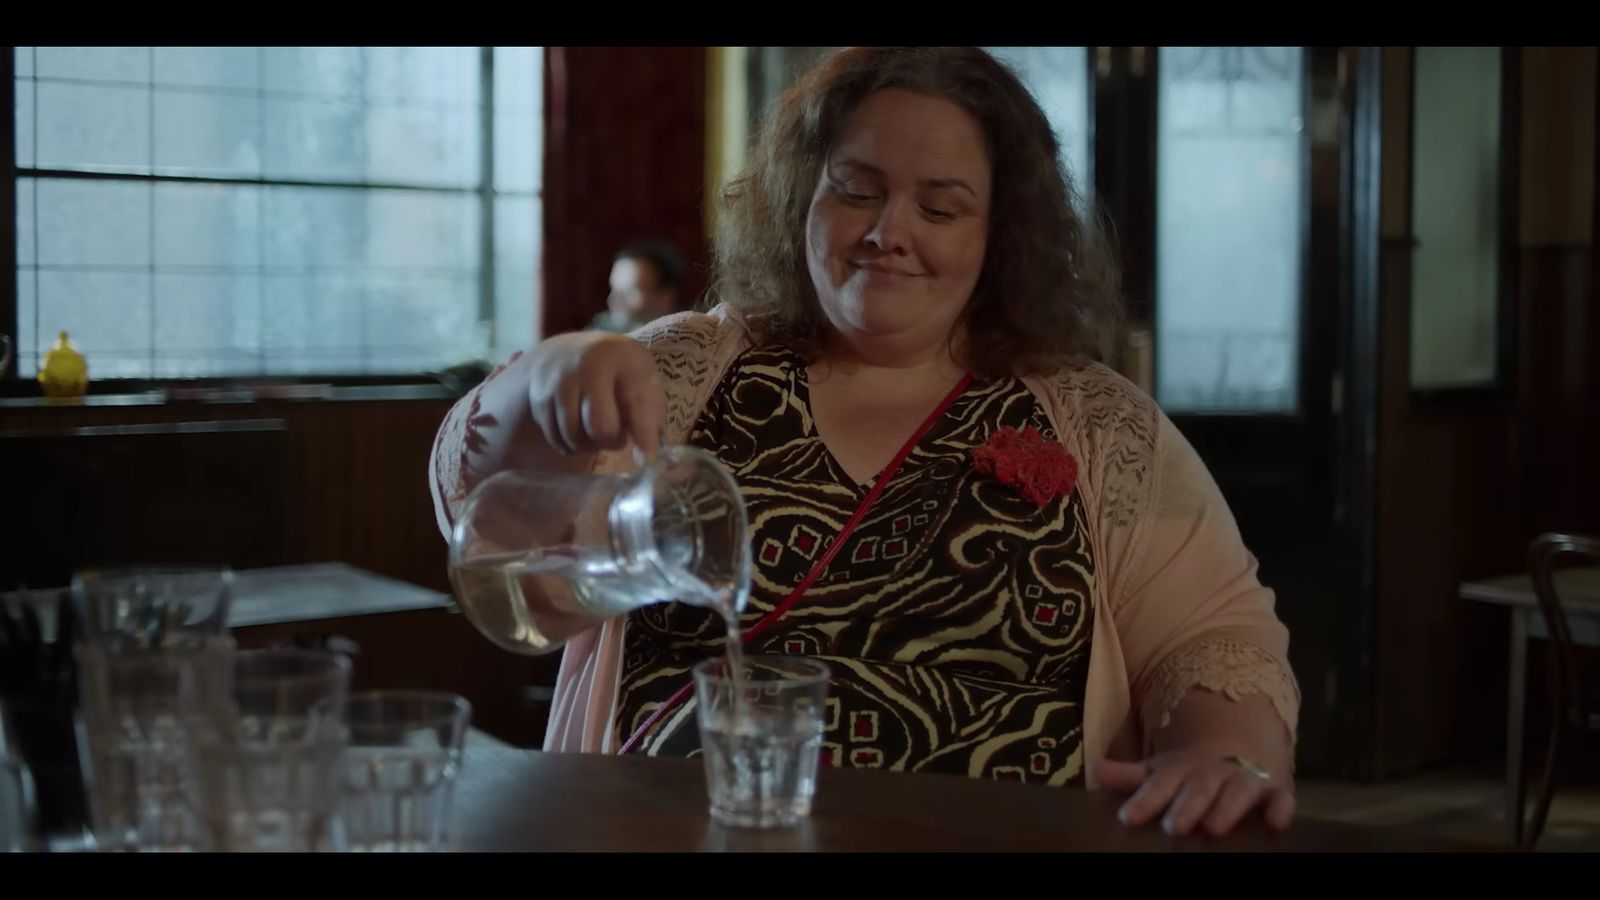 Jessica gunning as Martha on Baby Reindeer pouring water in a glass